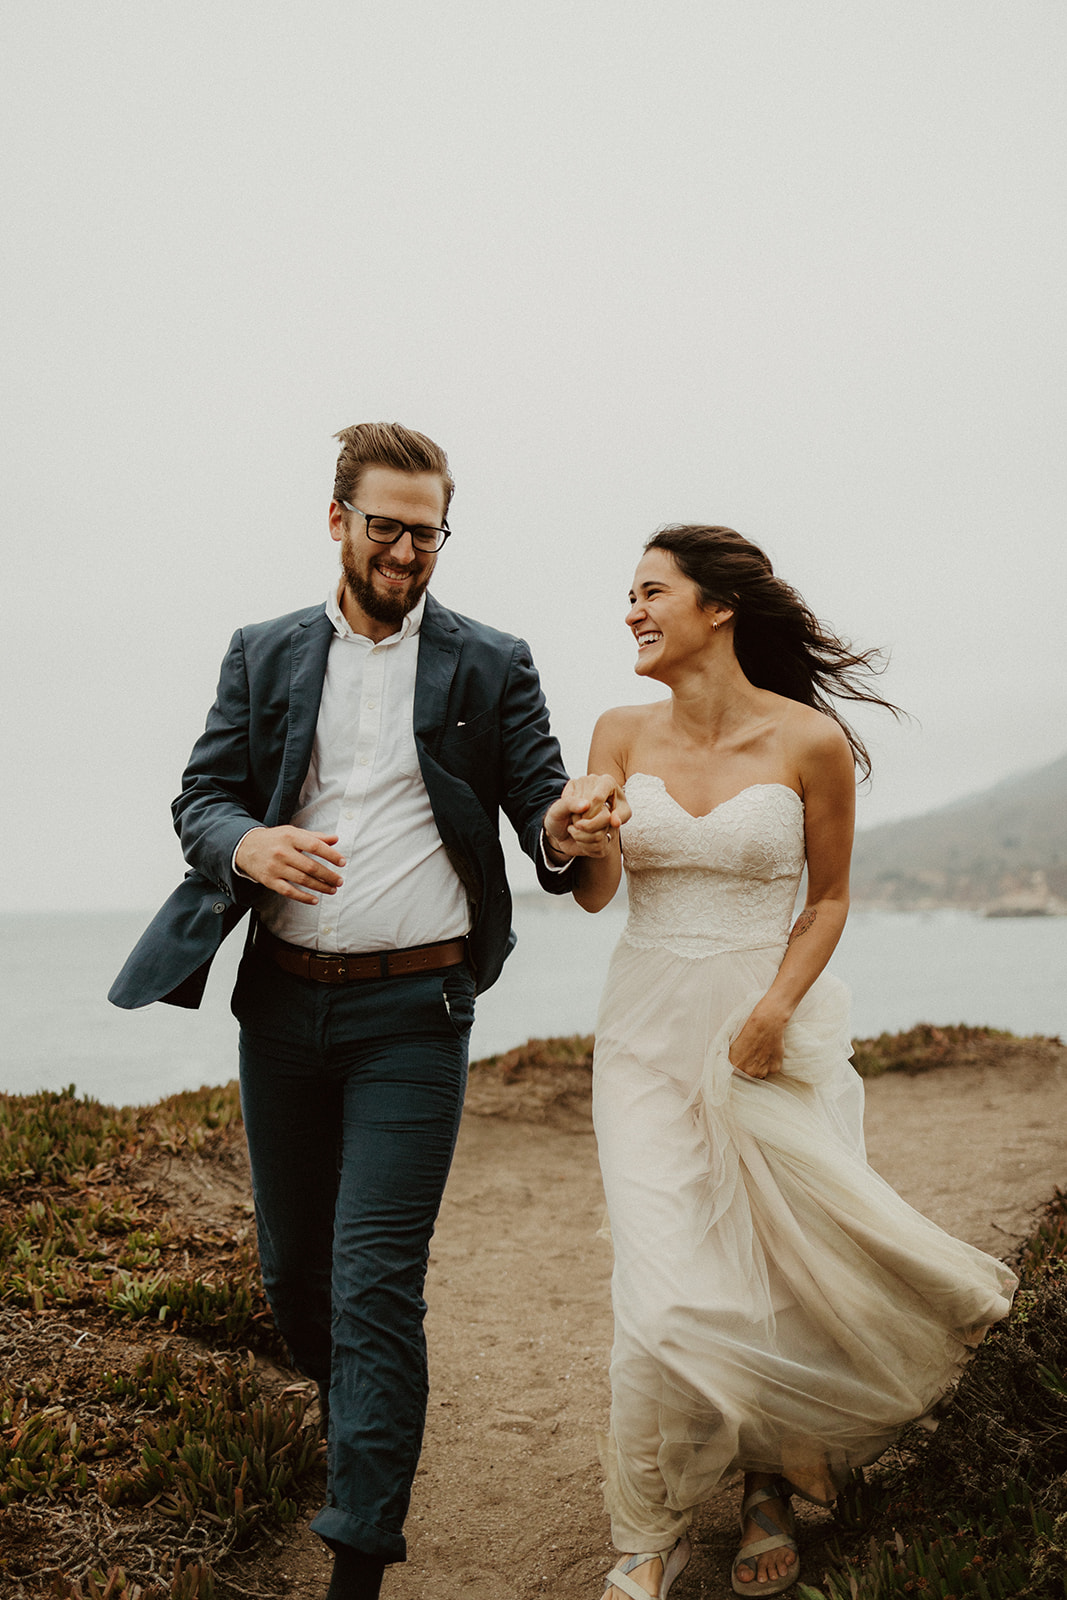 the couple laughing and walking as the wind blows their hair